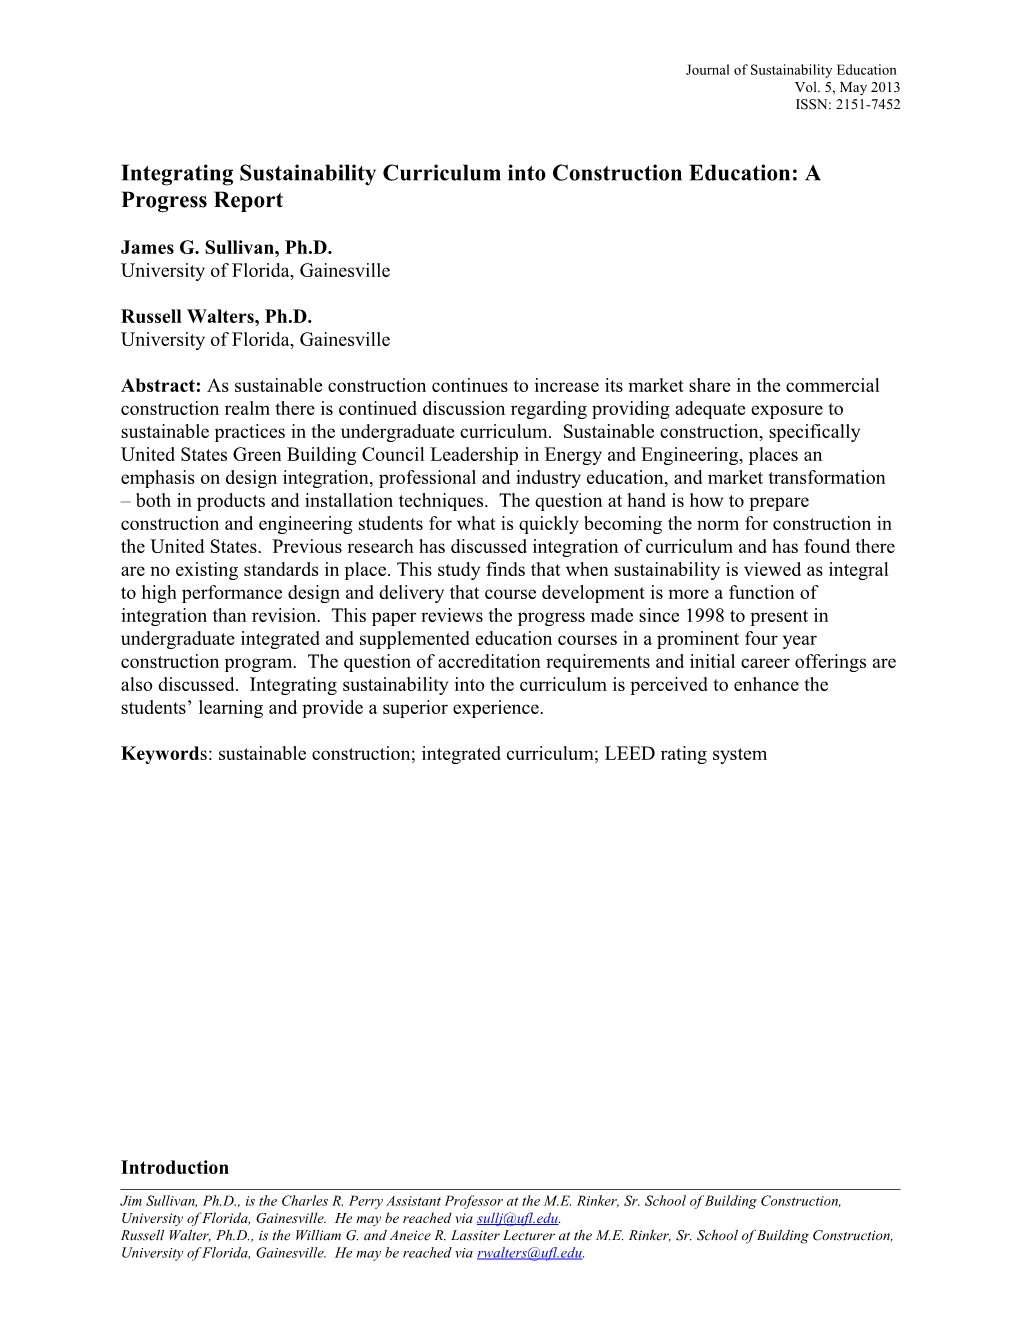 Integrating Sustainability Curriculum Into Construction Education: a Progress Report